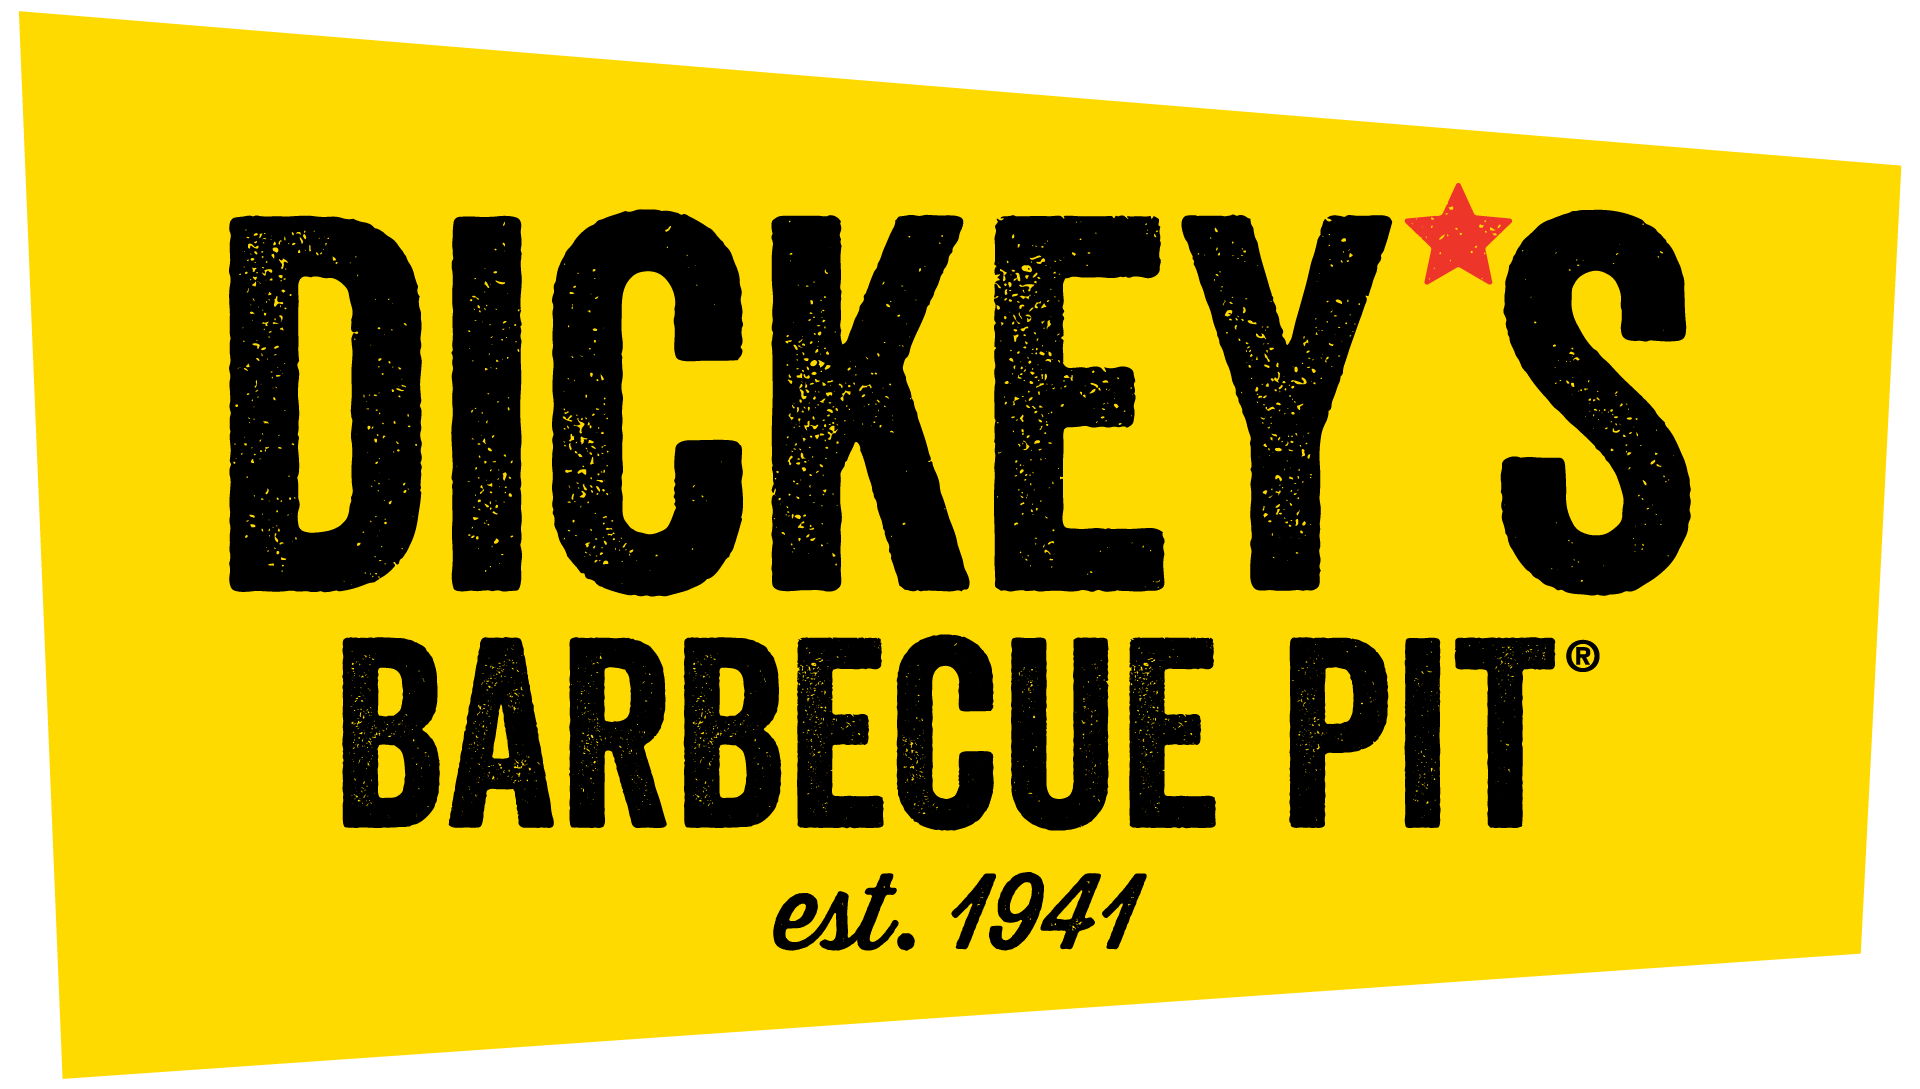 Dickey’s Barbecue and the Dallas Cowboys offer Game Day Sweepstakes